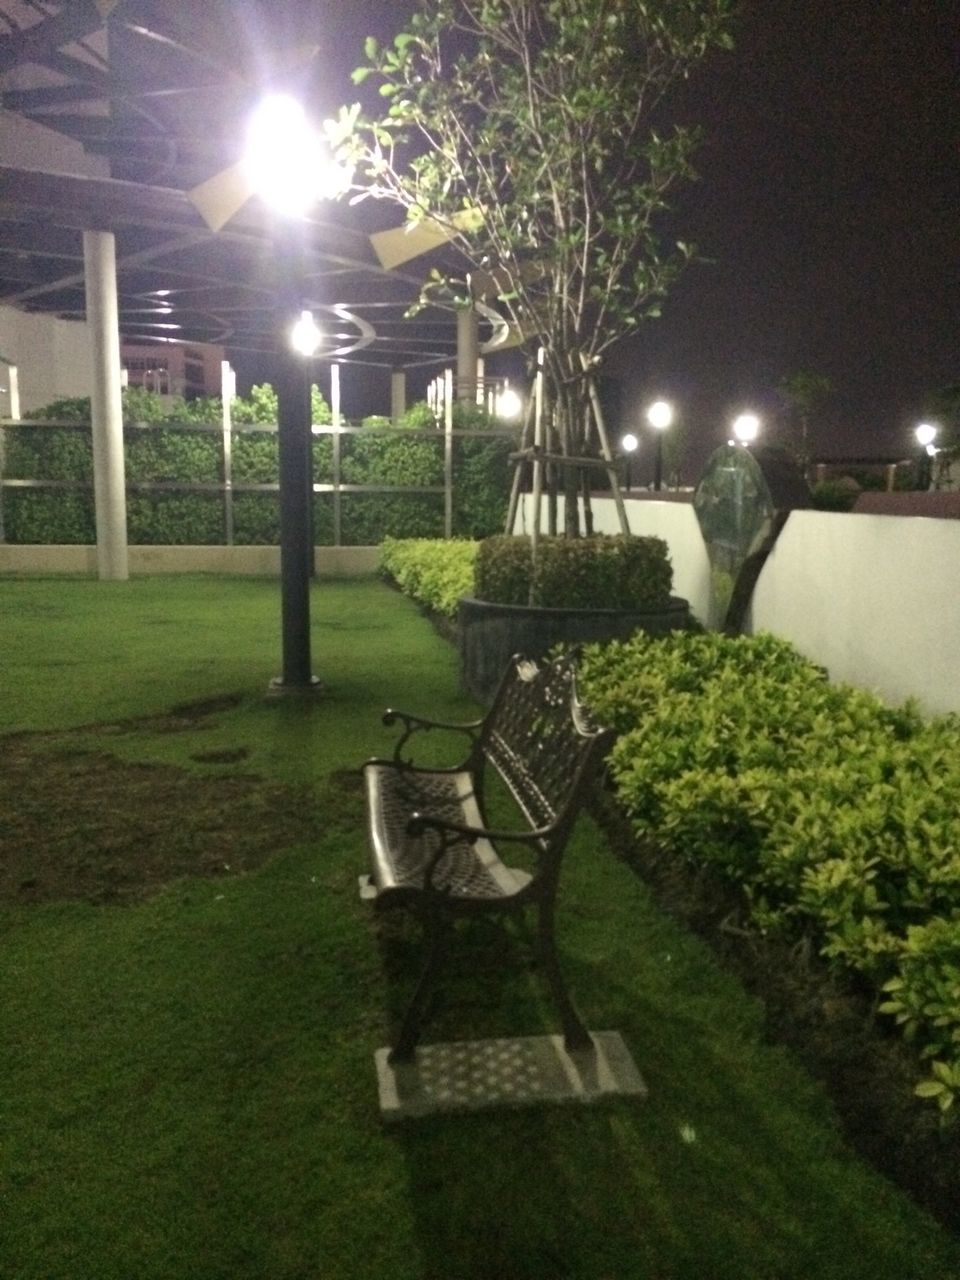 grass, lighting equipment, lawn, green color, tree, street light, absence, sunlight, built structure, illuminated, plant, empty, growth, architecture, front or back yard, chair, night, park - man made space, bench, no people